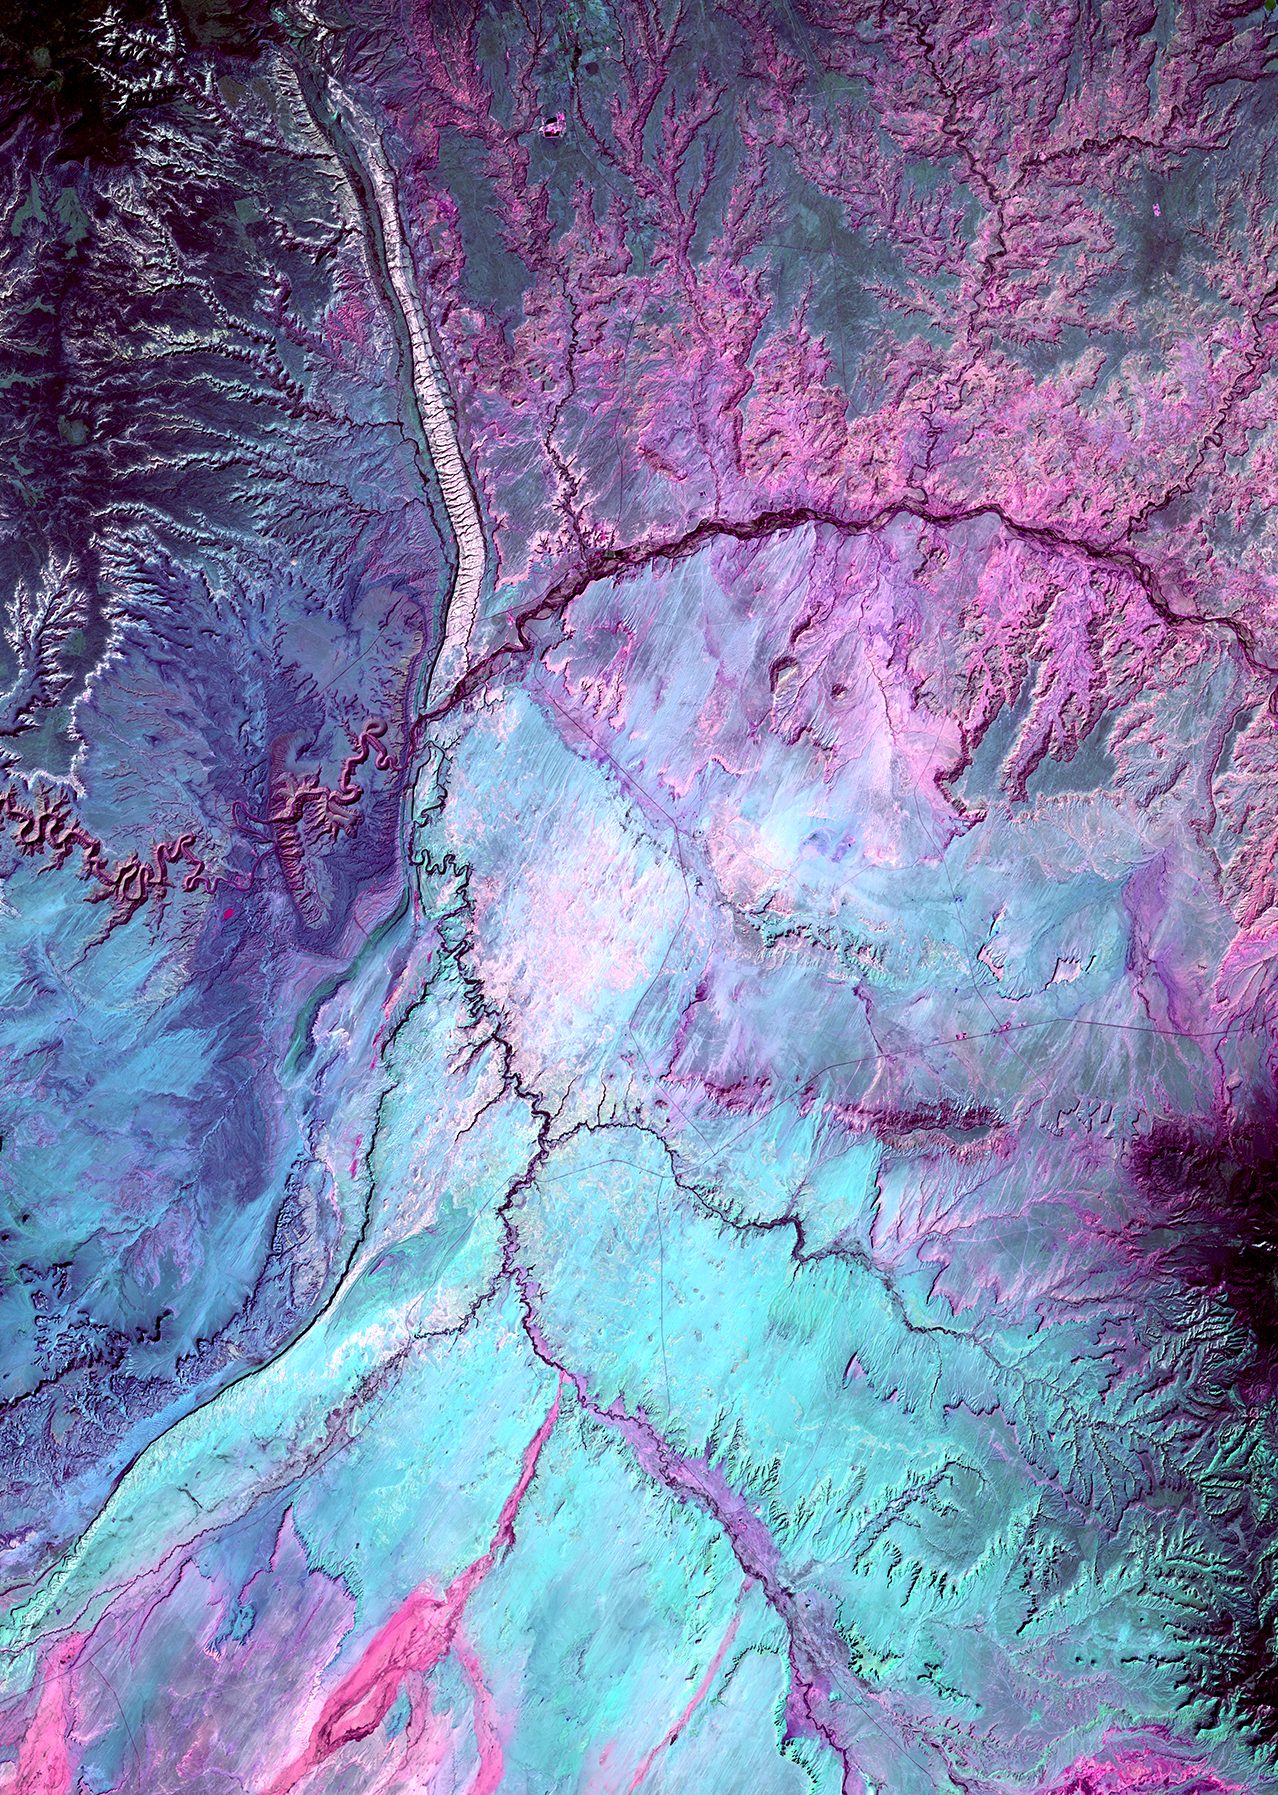 What looks like lightning arcing through an ominous cloud is actually a dry landscape of rocky buttes in southern Utah and northeastern Arizona. River channels flow north from Arizona into the San Juan River. The light vertical feature at the top of the image is referred to as Comb Ridge, a jagged fold in the Earth's crust called a monocline. (USGS/NASA)